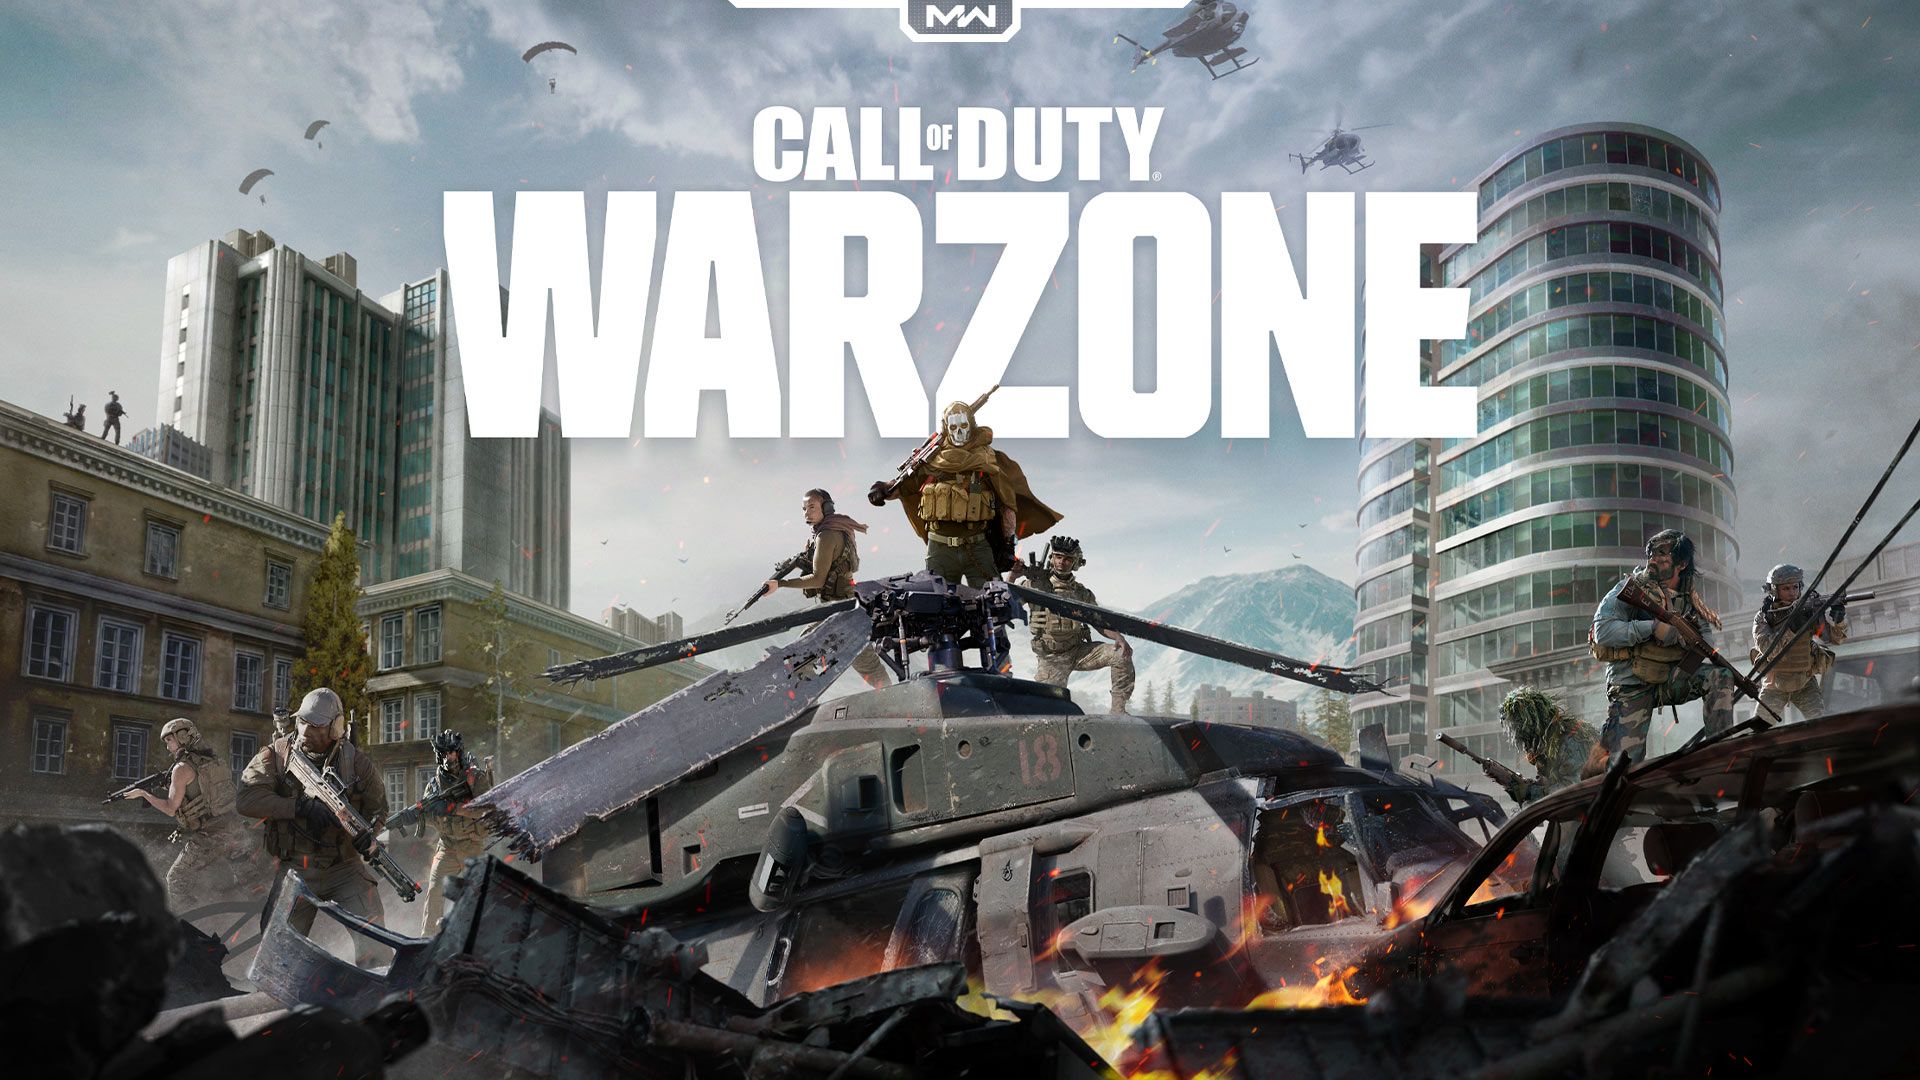 CoD: Warzone - the squad killed 100 people on the map and set a world record